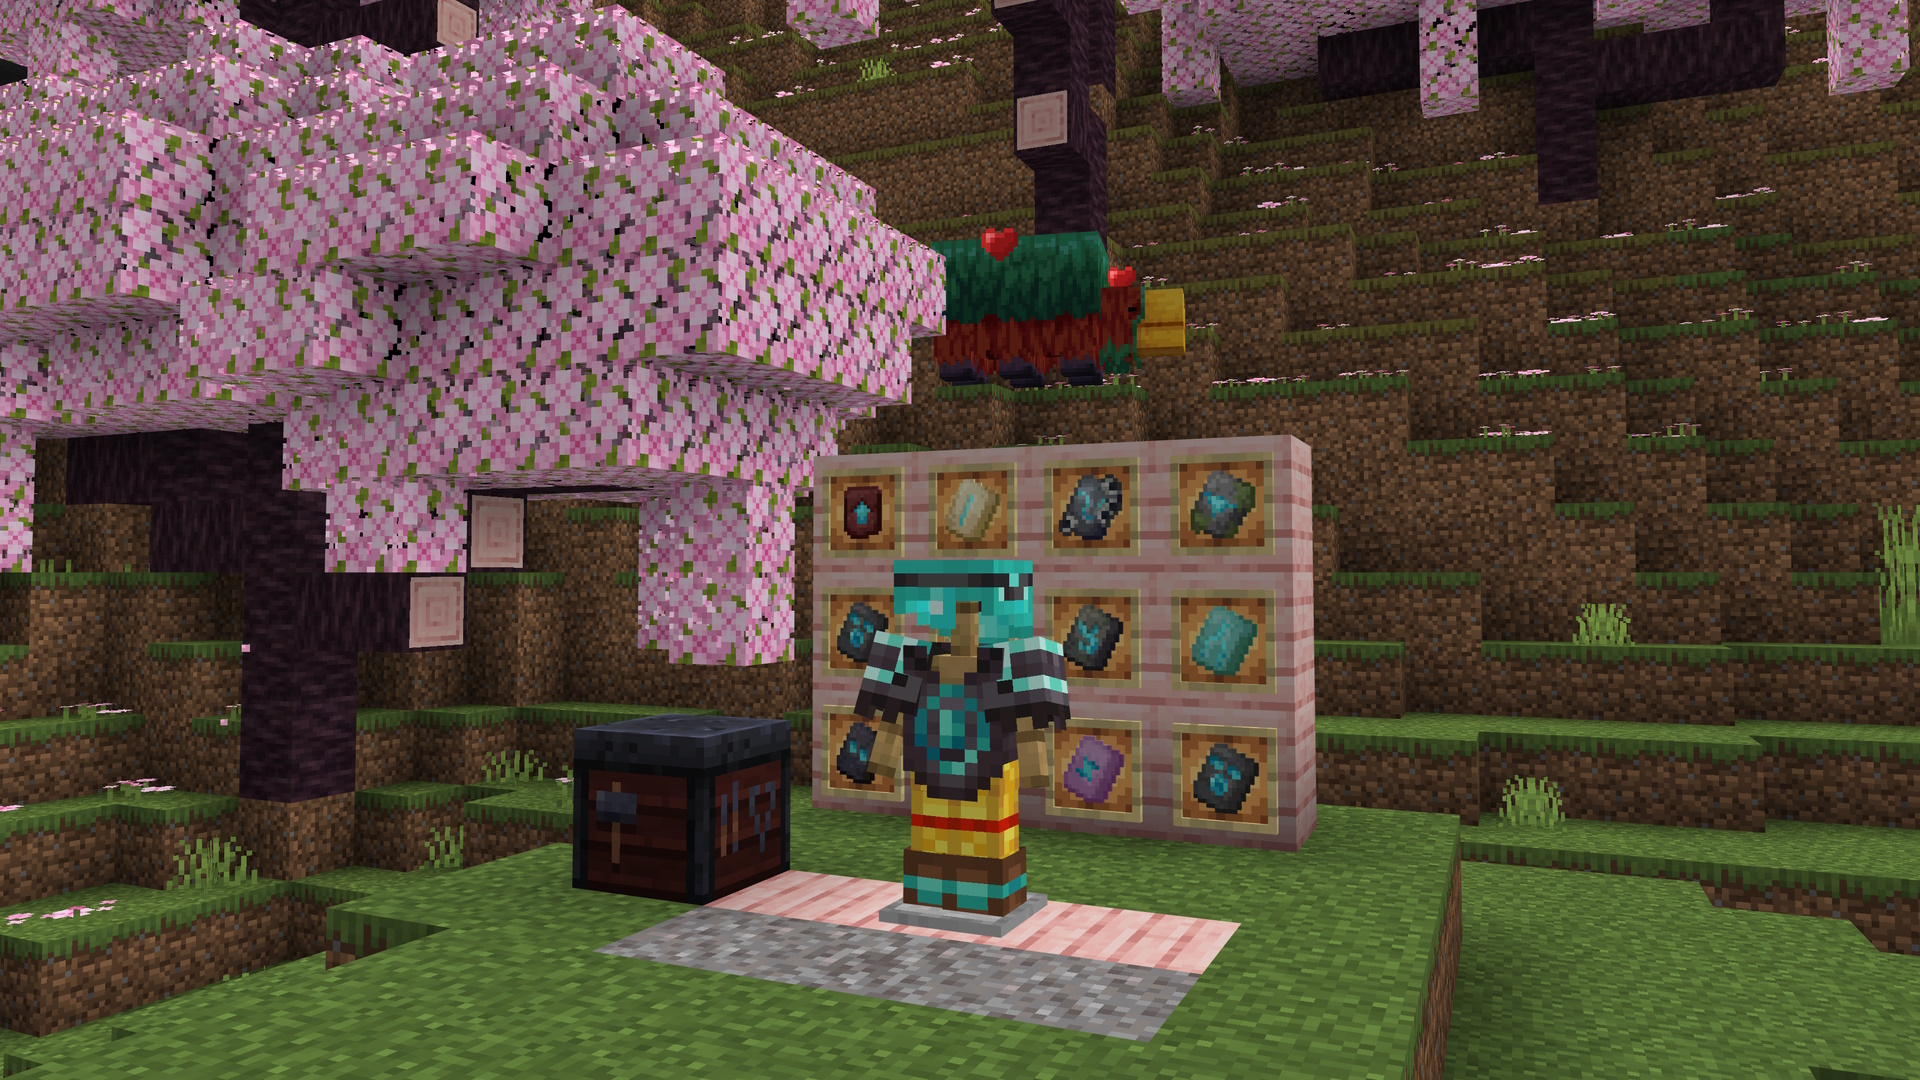 A Minecraft screenshot featuring an armor stand with armor trims. The scene is set in a cherry grove with a sniffer in the background.